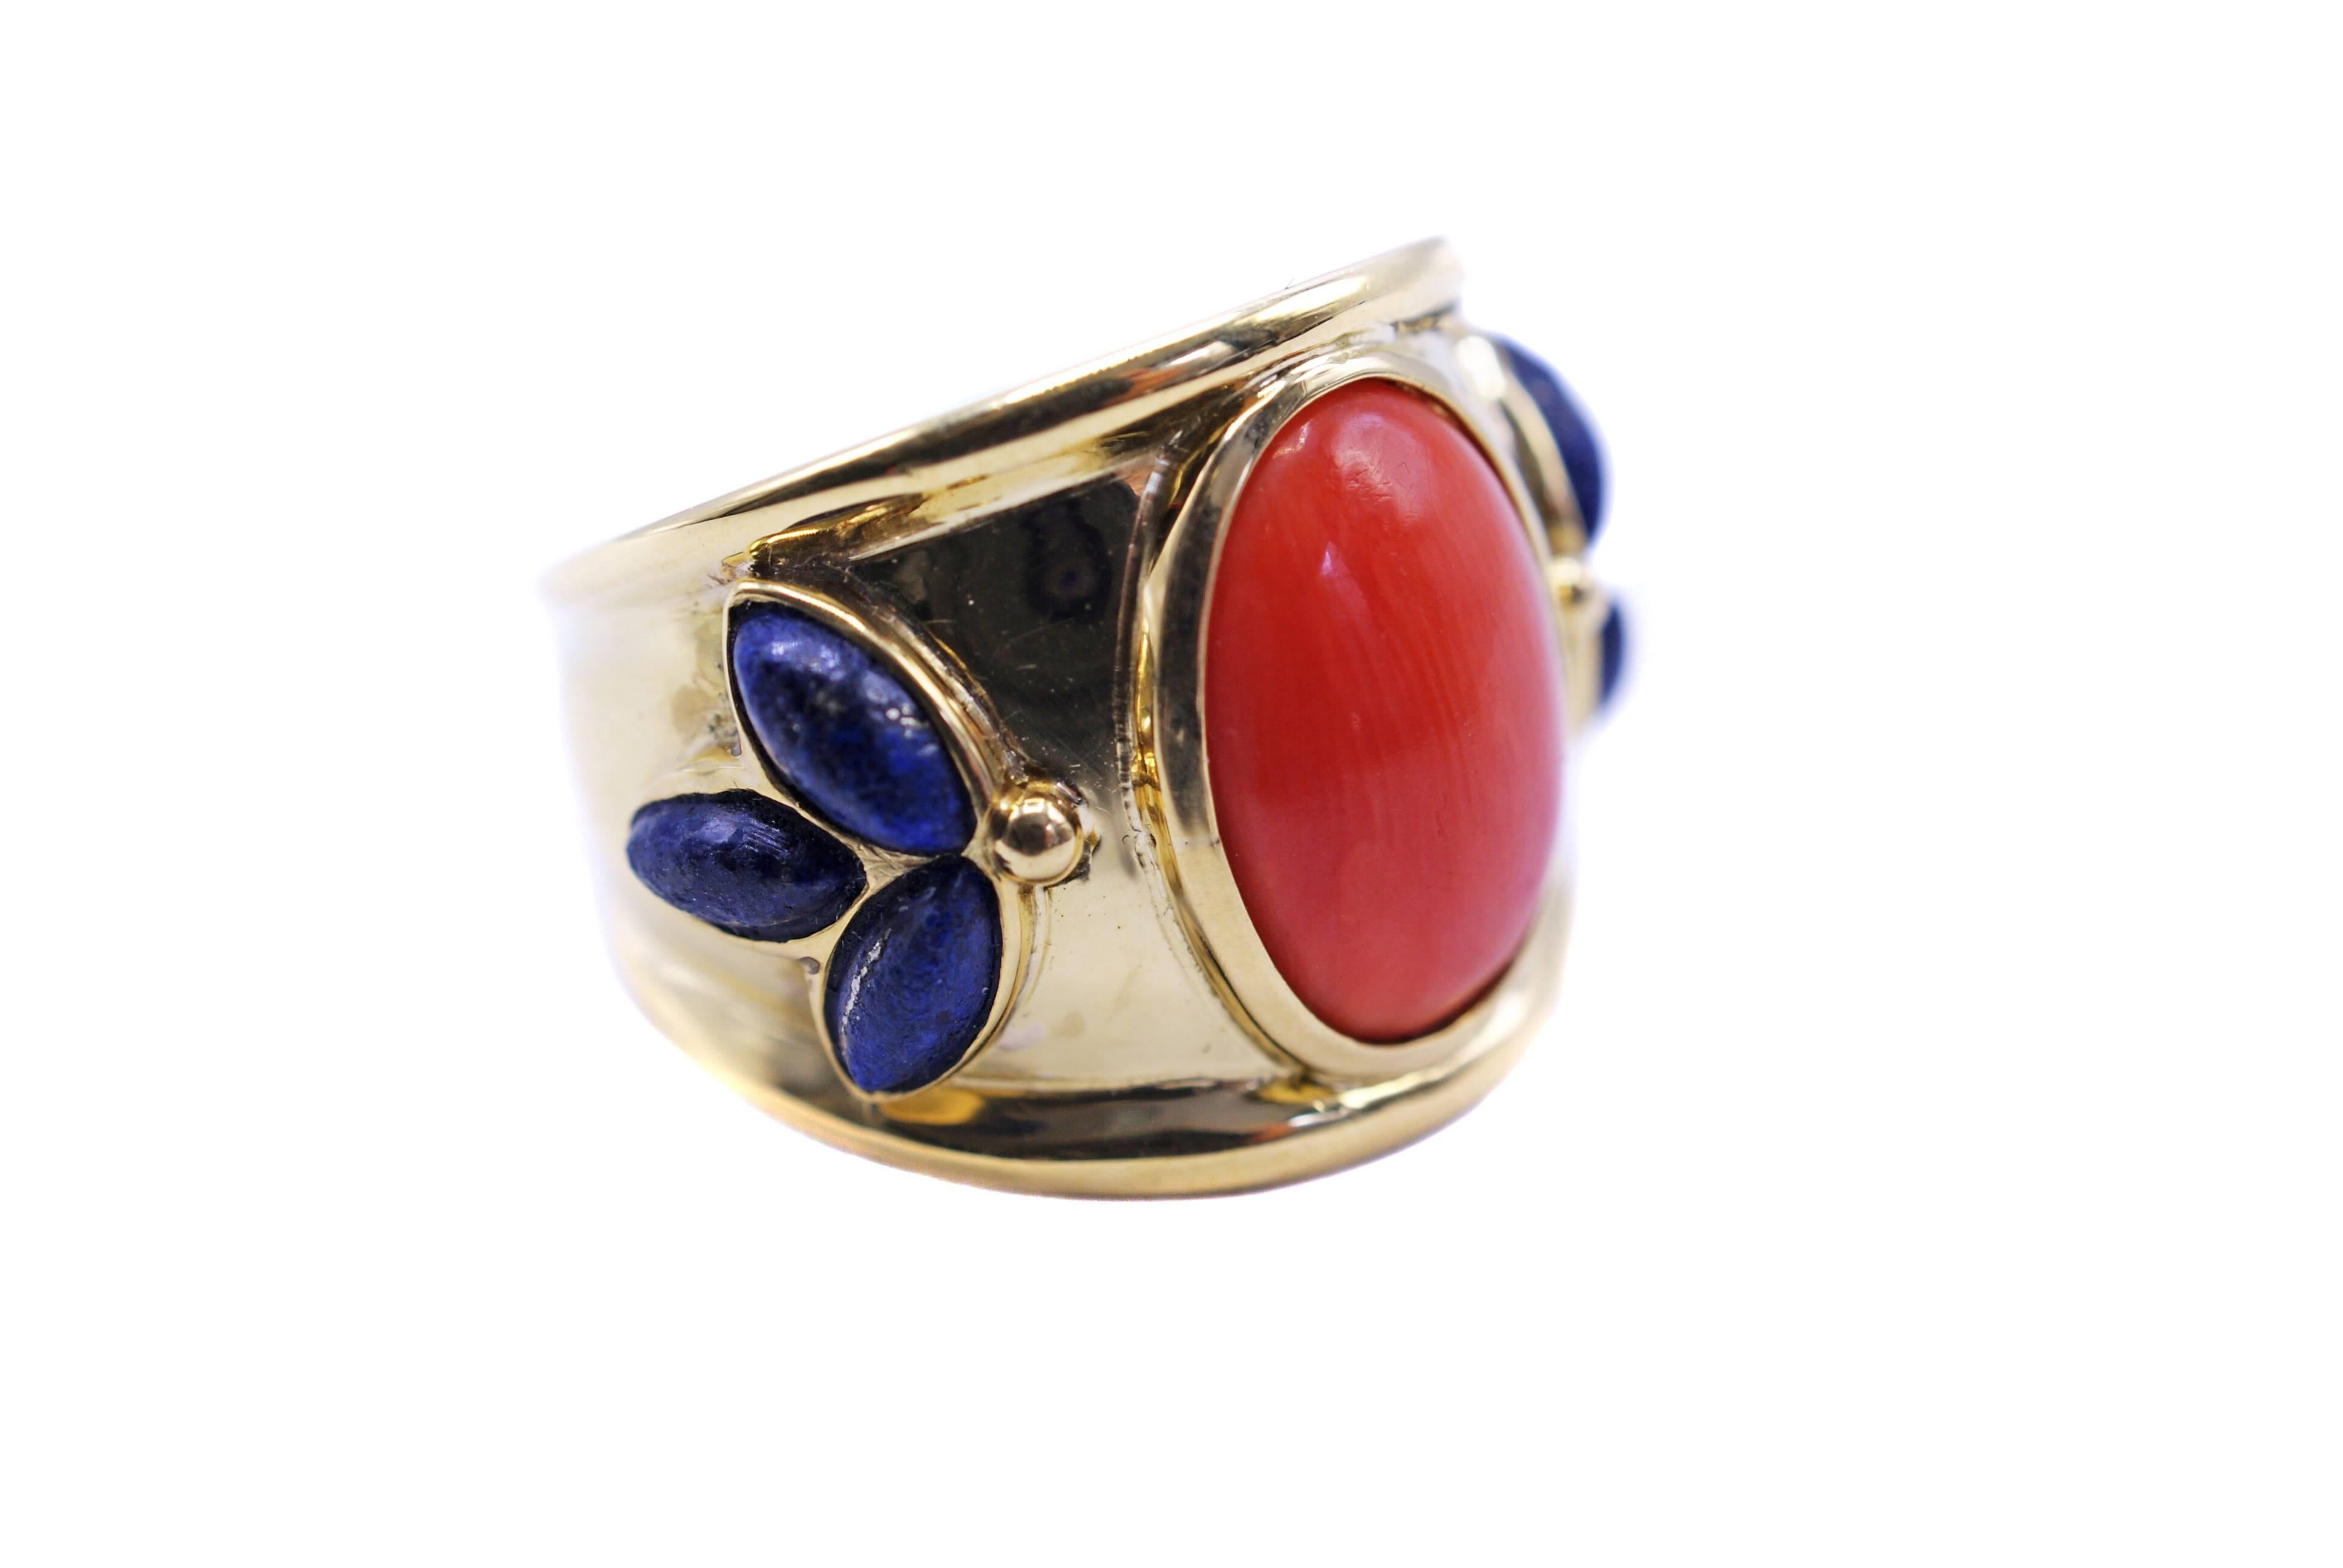 Colorful 18 Karat yellow gold wide band centrally set with one bright orange red oval Mediterranean coral cabochon. The sides of the band are embellished by 3 navette shaped Lapis Lazuli cabs which are bezel set in the shape of a fan on both sides